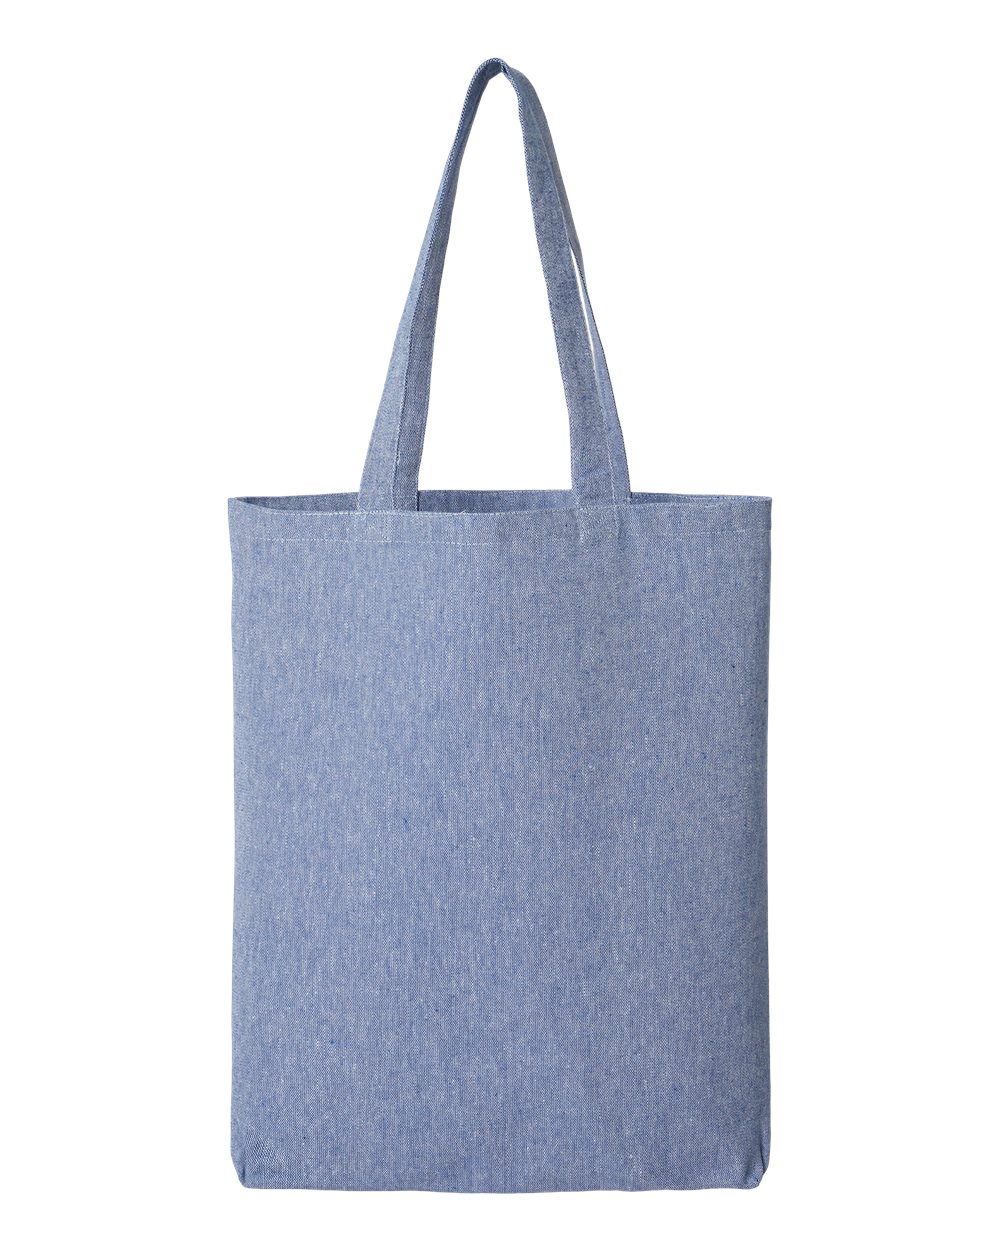 OAD OAD106R - Midweight Recycled Gusseted Tote